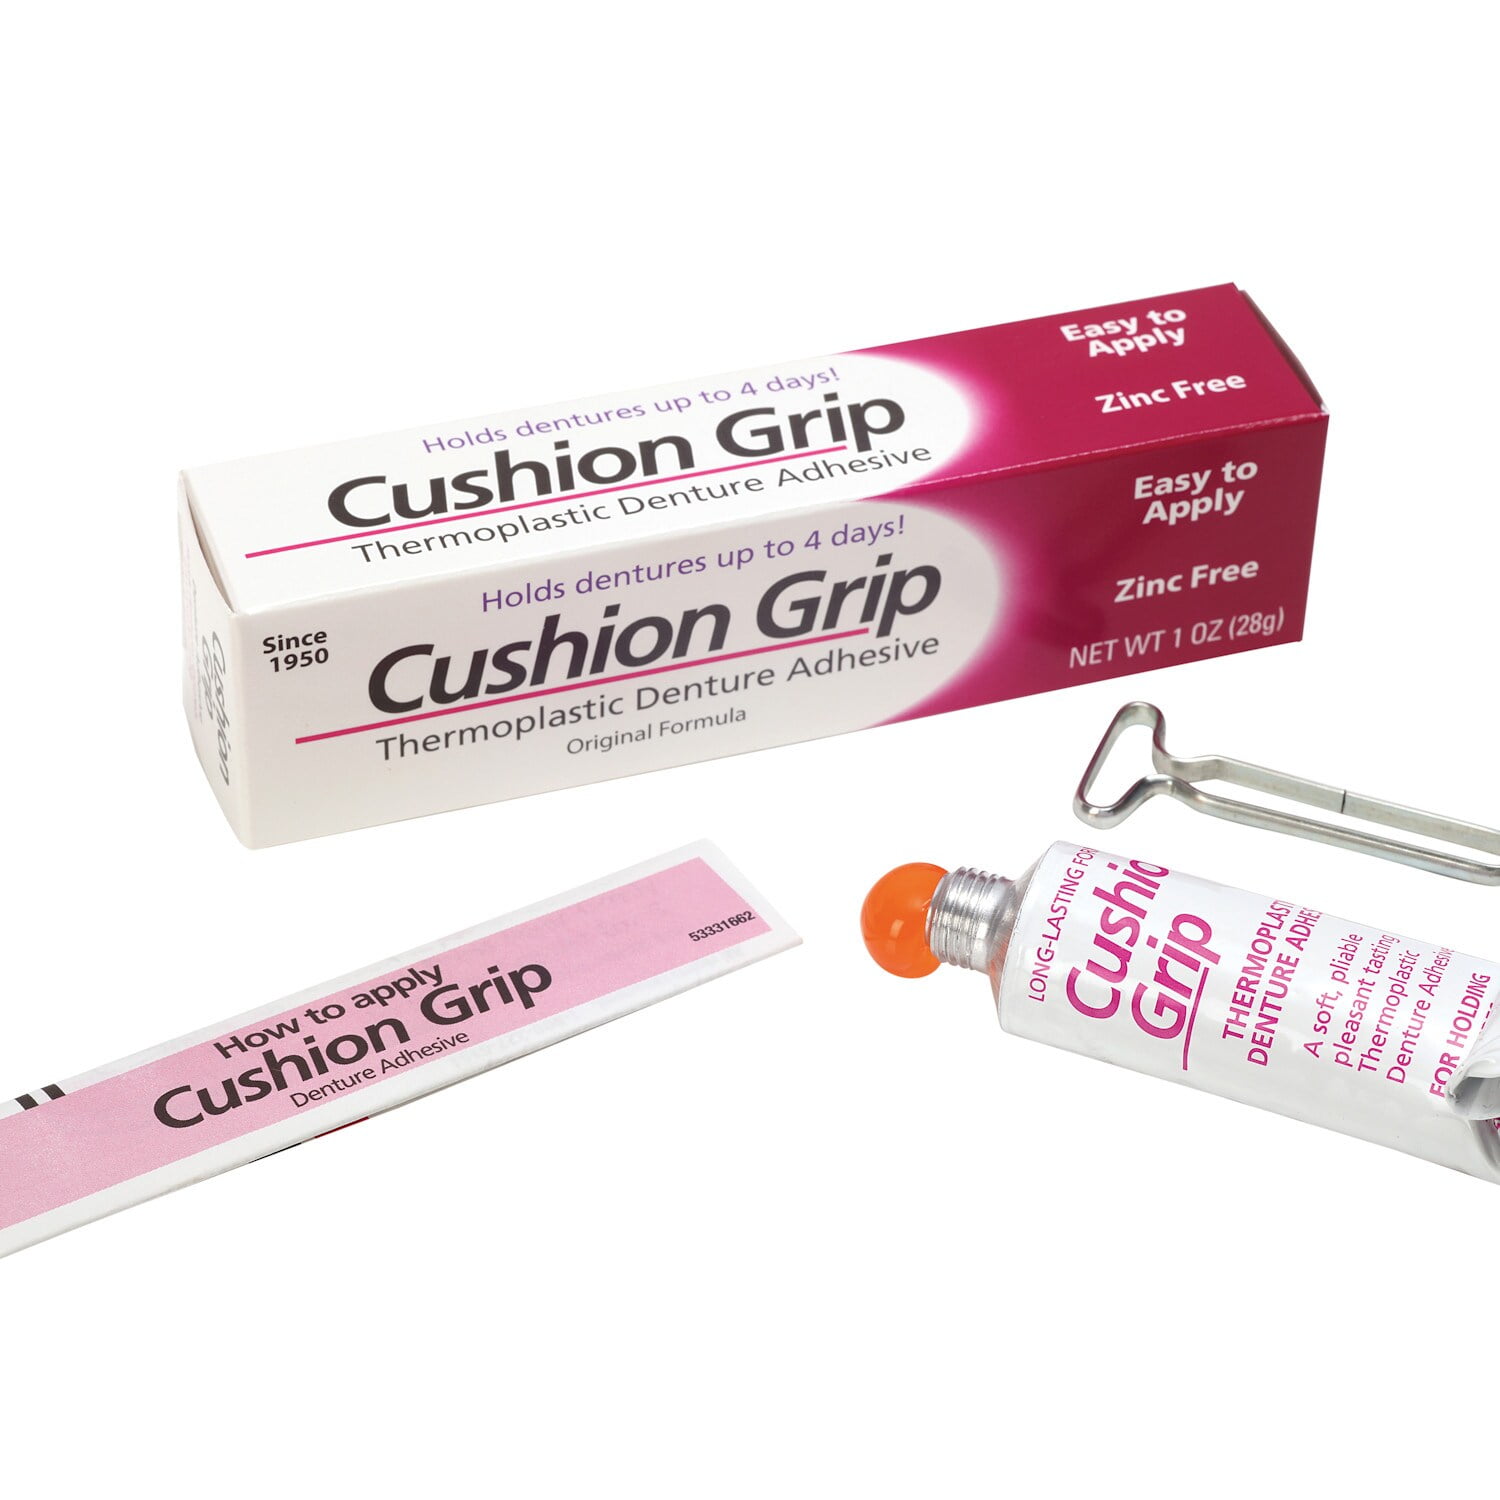 Cushion Grip Thermoplastic Denture Adhesive for Refitting and Tightening  Loose Dentures [Not a Glue Adhesive, Acts Like a Soft Reliner] (1 Oz) Hold